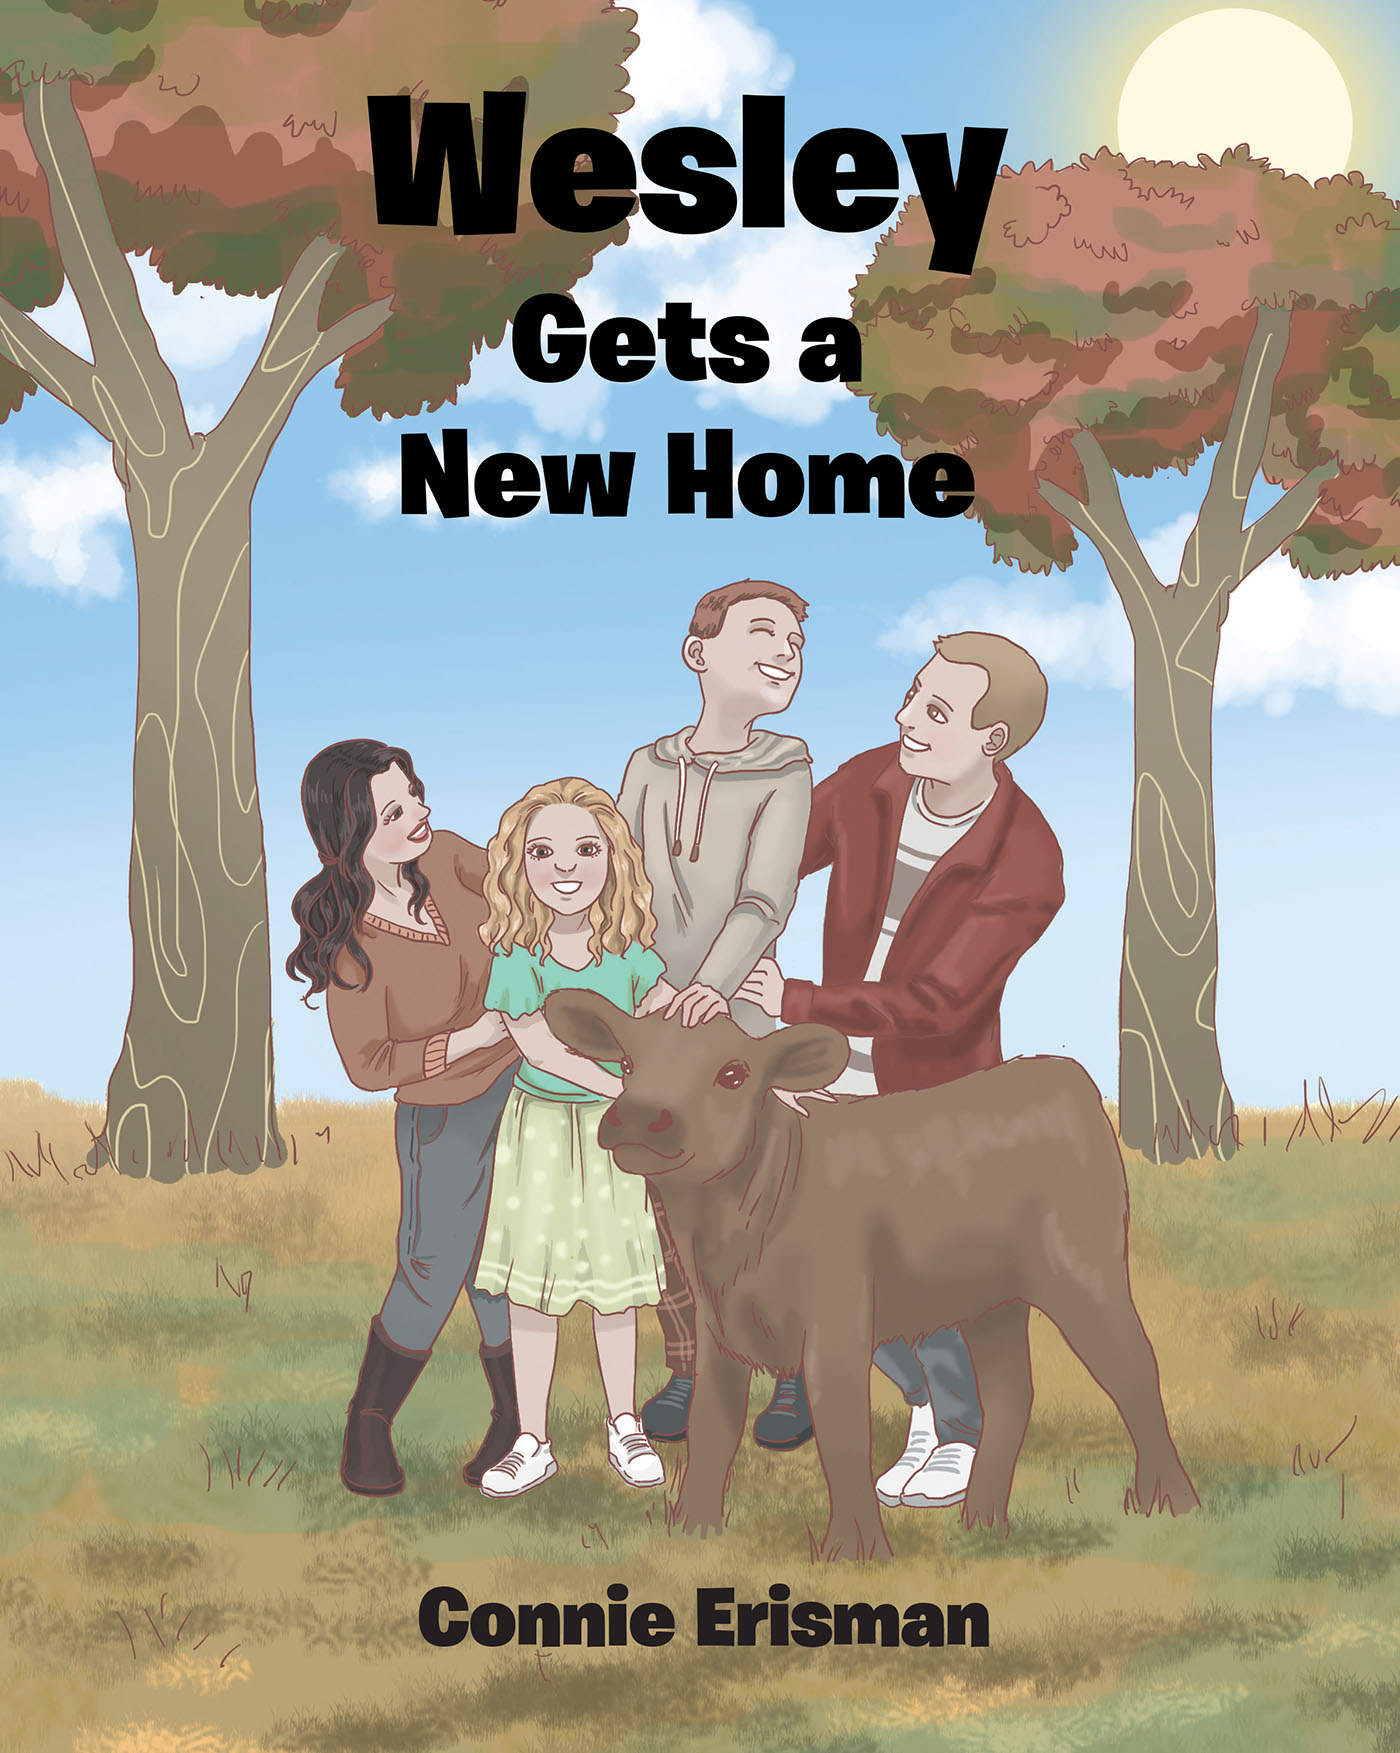 Connie Erisman’s Newly Released "Wesley Gets a New Home" is a Sweet Tale of a Little Orphaned Calf’s Journey